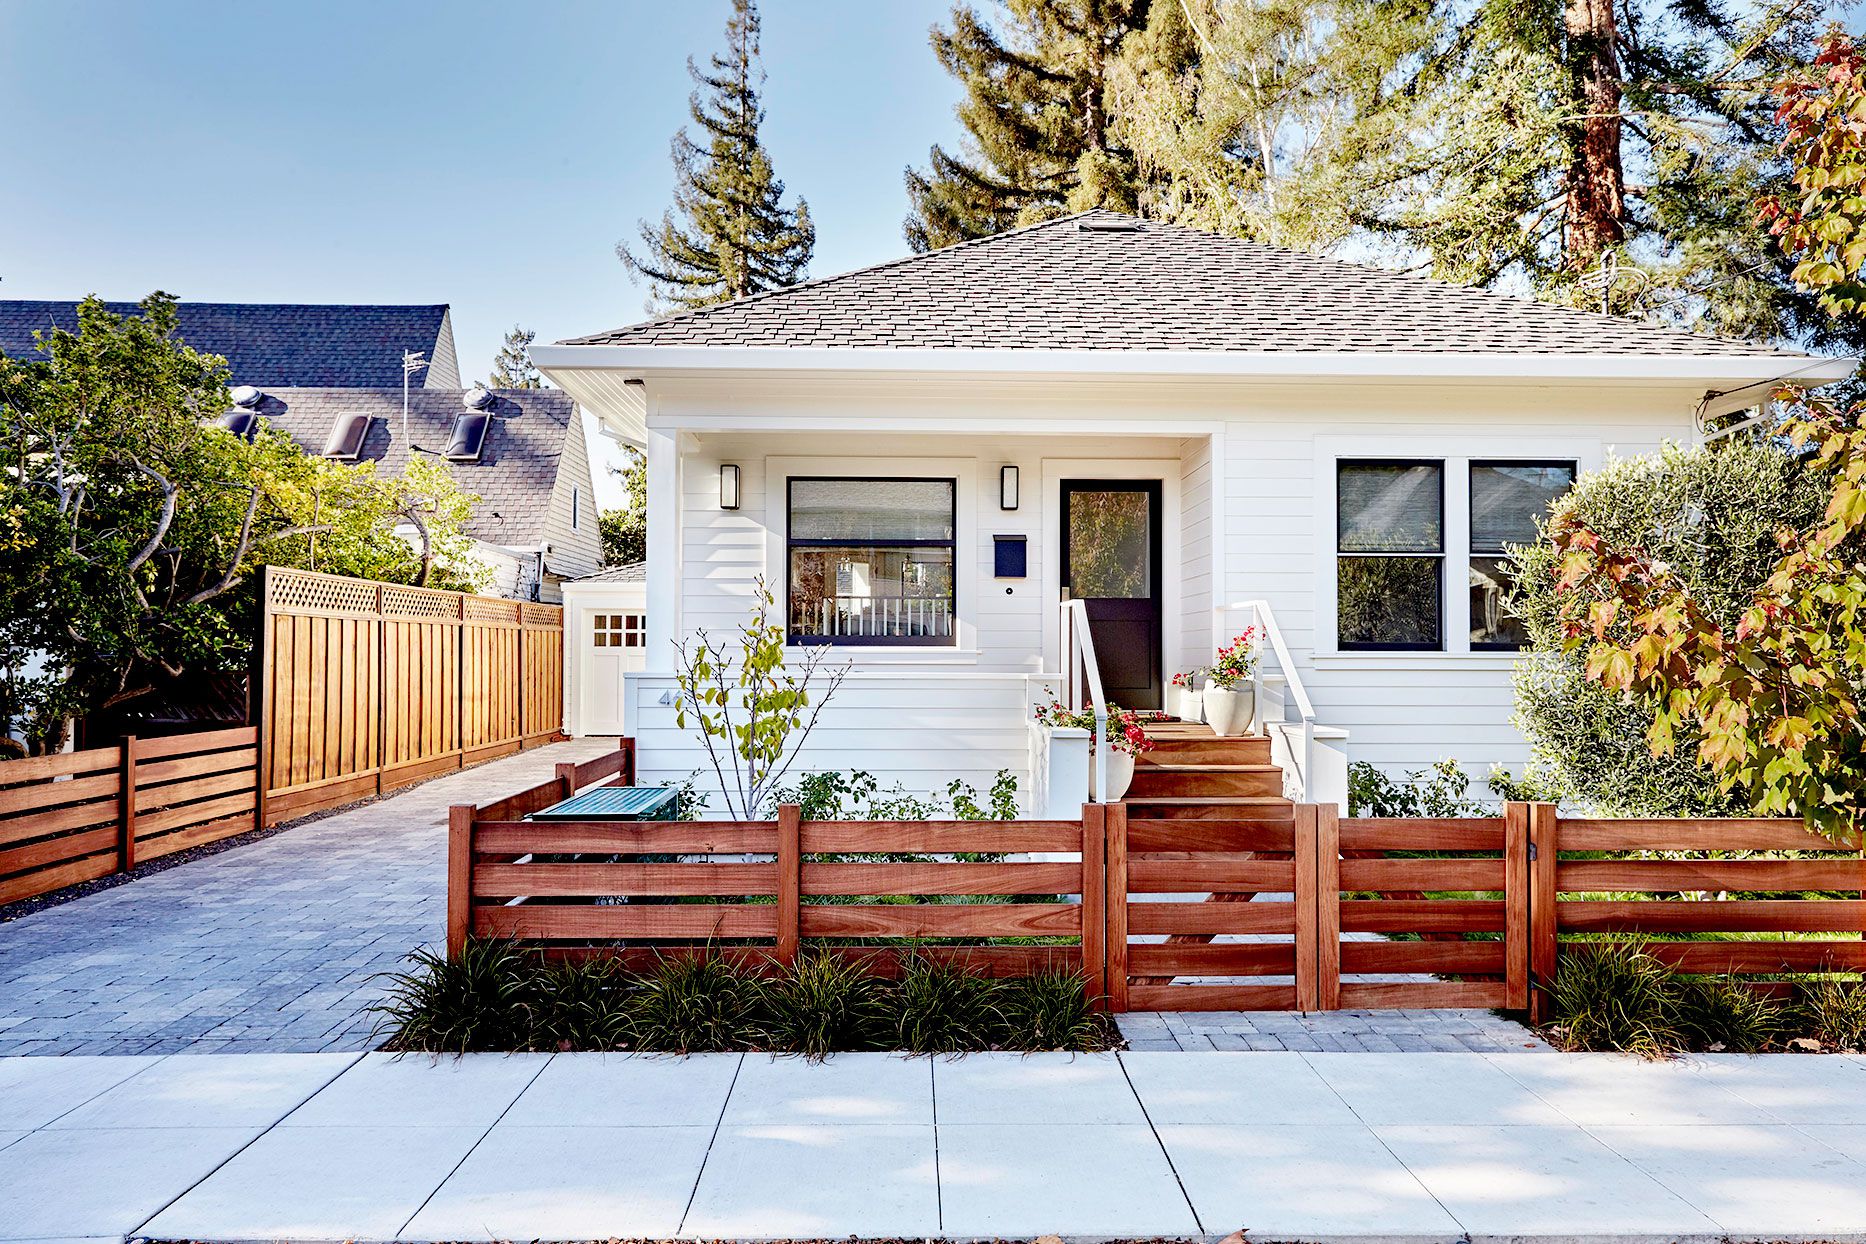 Why A Beautiful, Well-Built Fence Can Improve Your Home’s Value